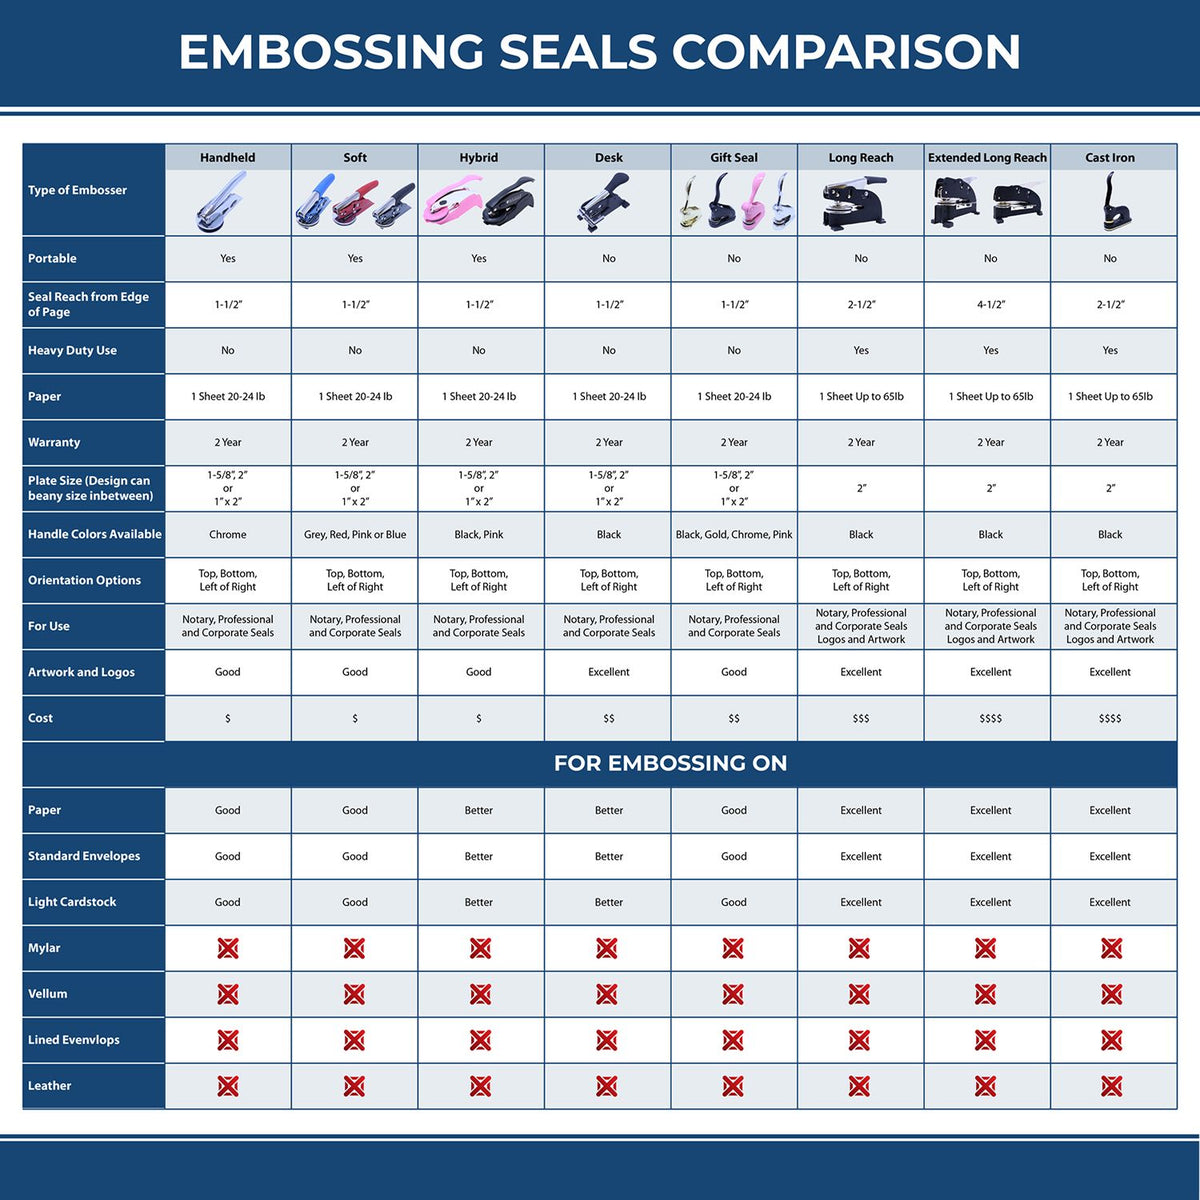 A comparison chart for the different types of mount models available for the Heavy Duty Cast Iron Kentucky Engineer Seal Embosser.